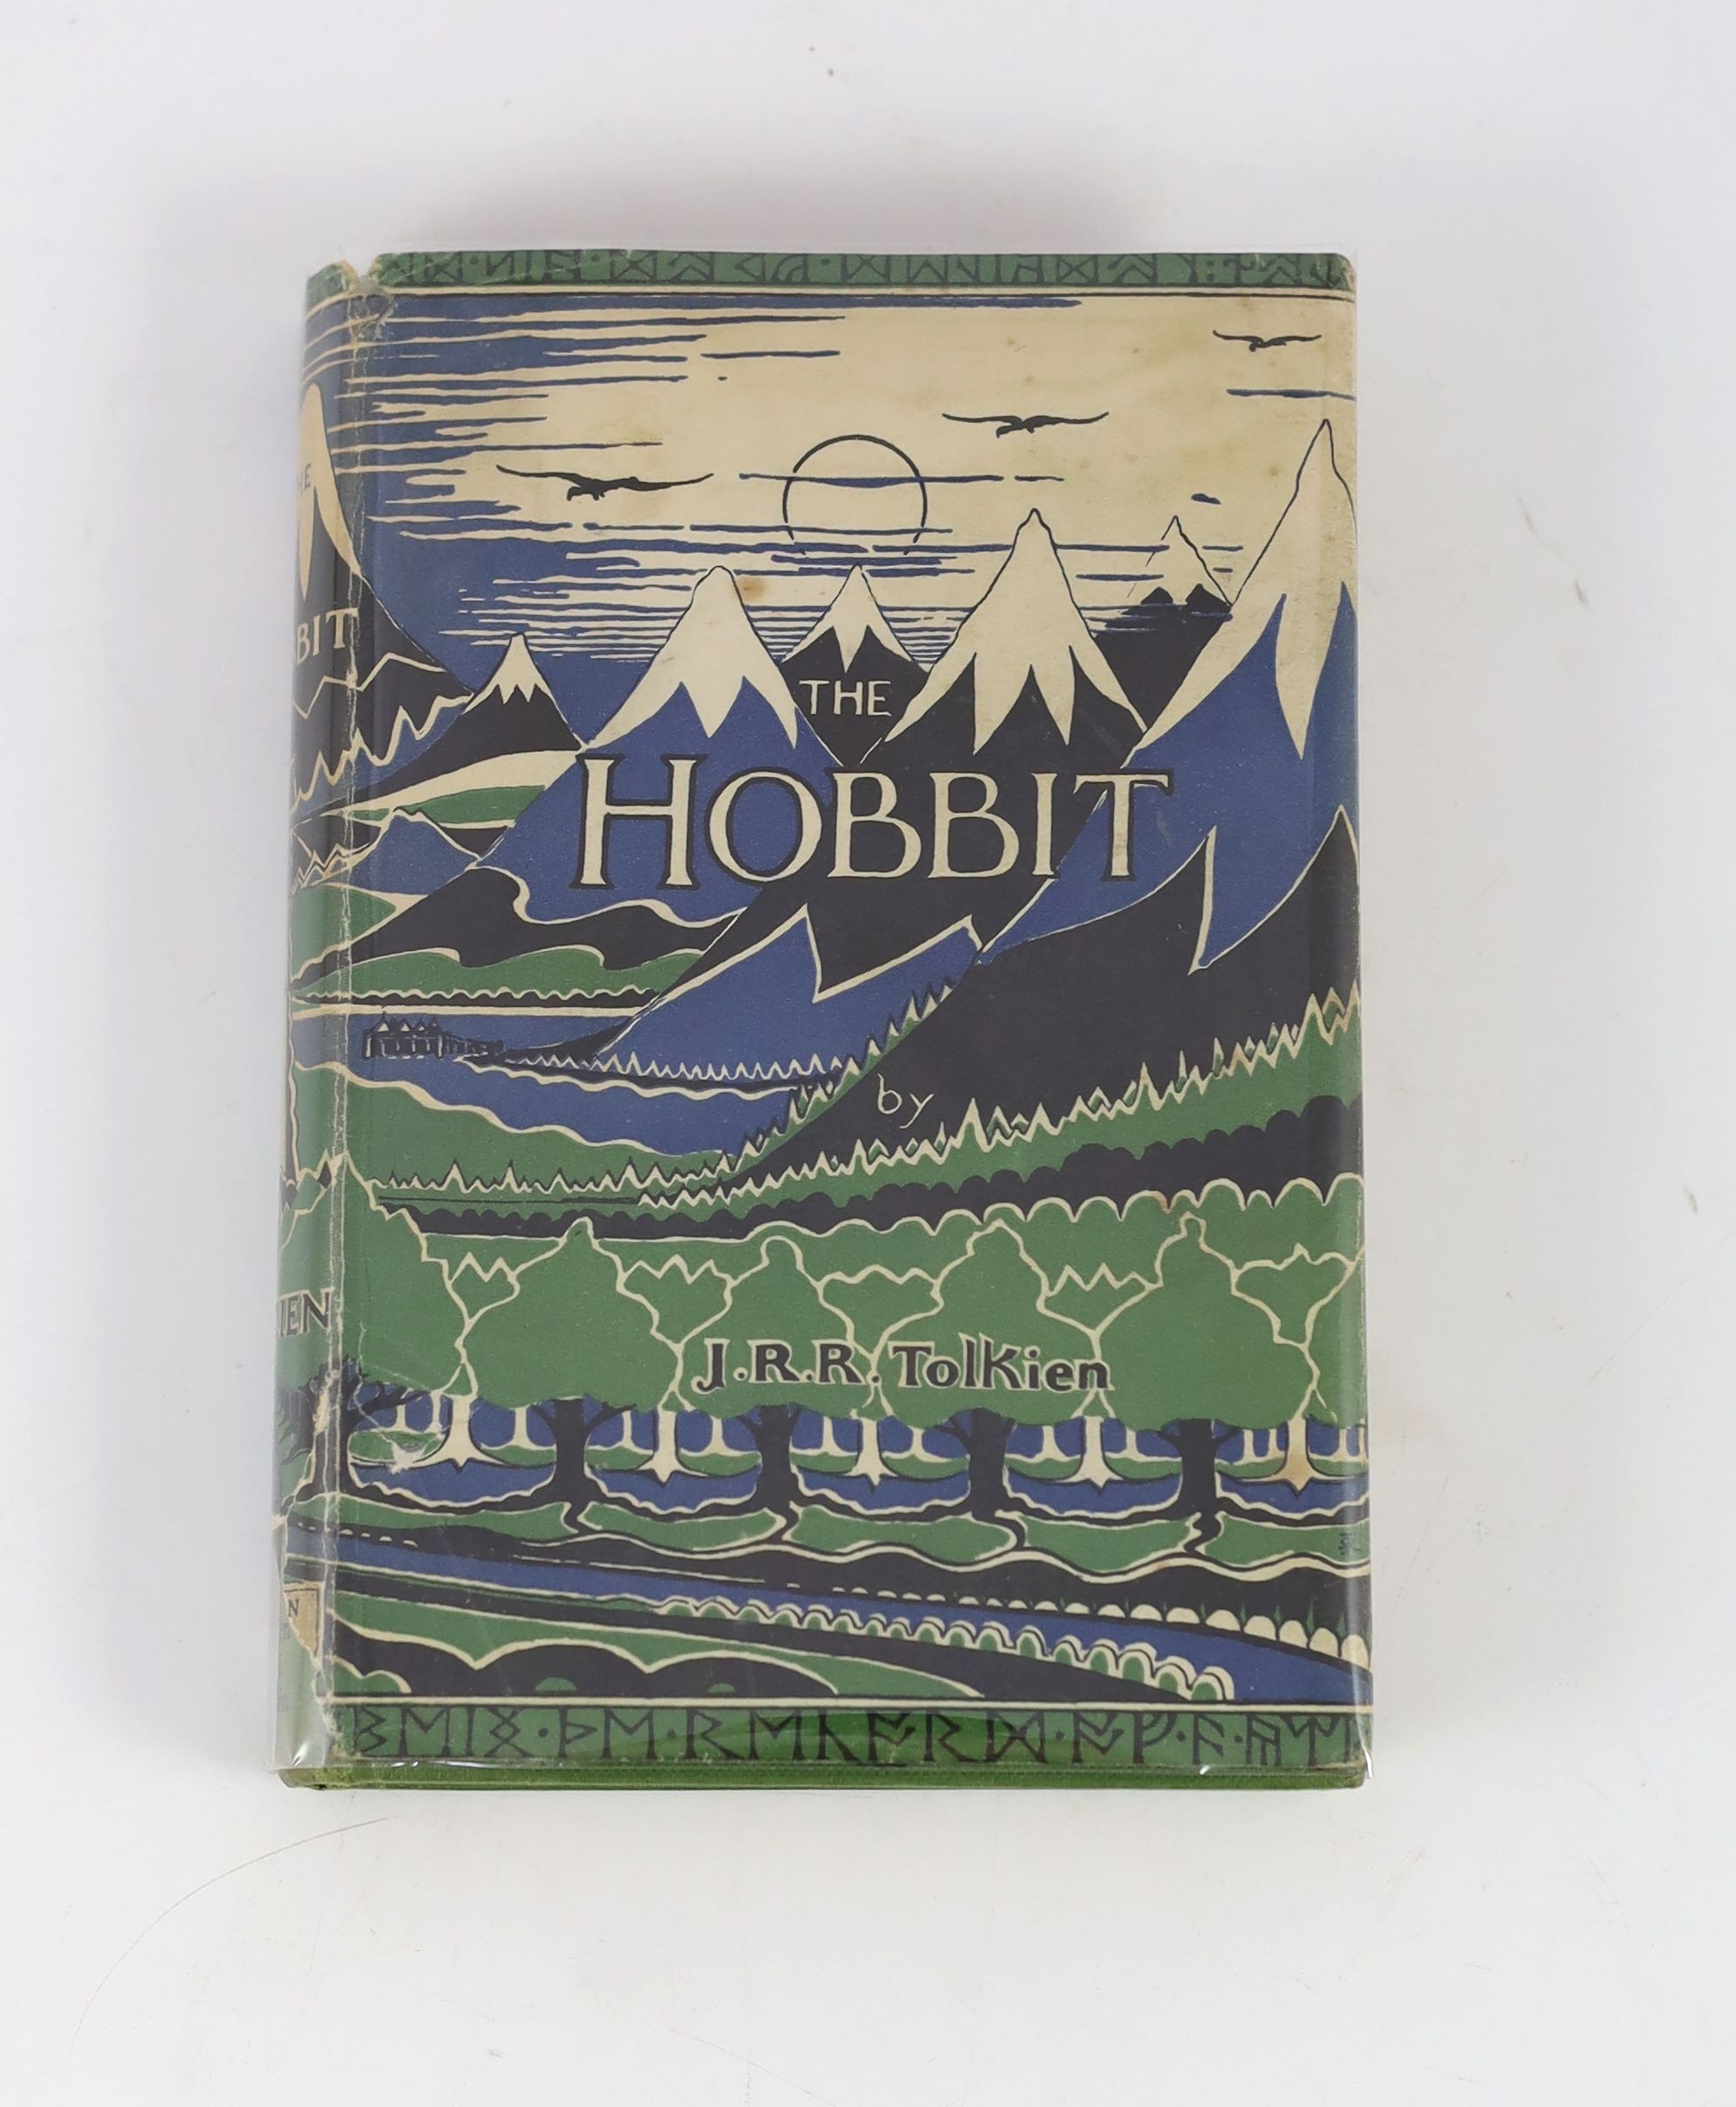 Tolkien, John Ronald Reuel - The Hobbit, 2nd edition, 9th impression, with colour frontispiece, map endpapers, original green cloth in unclipped d/j, with loss to foot of spine, bookplate to half title, covering an earli